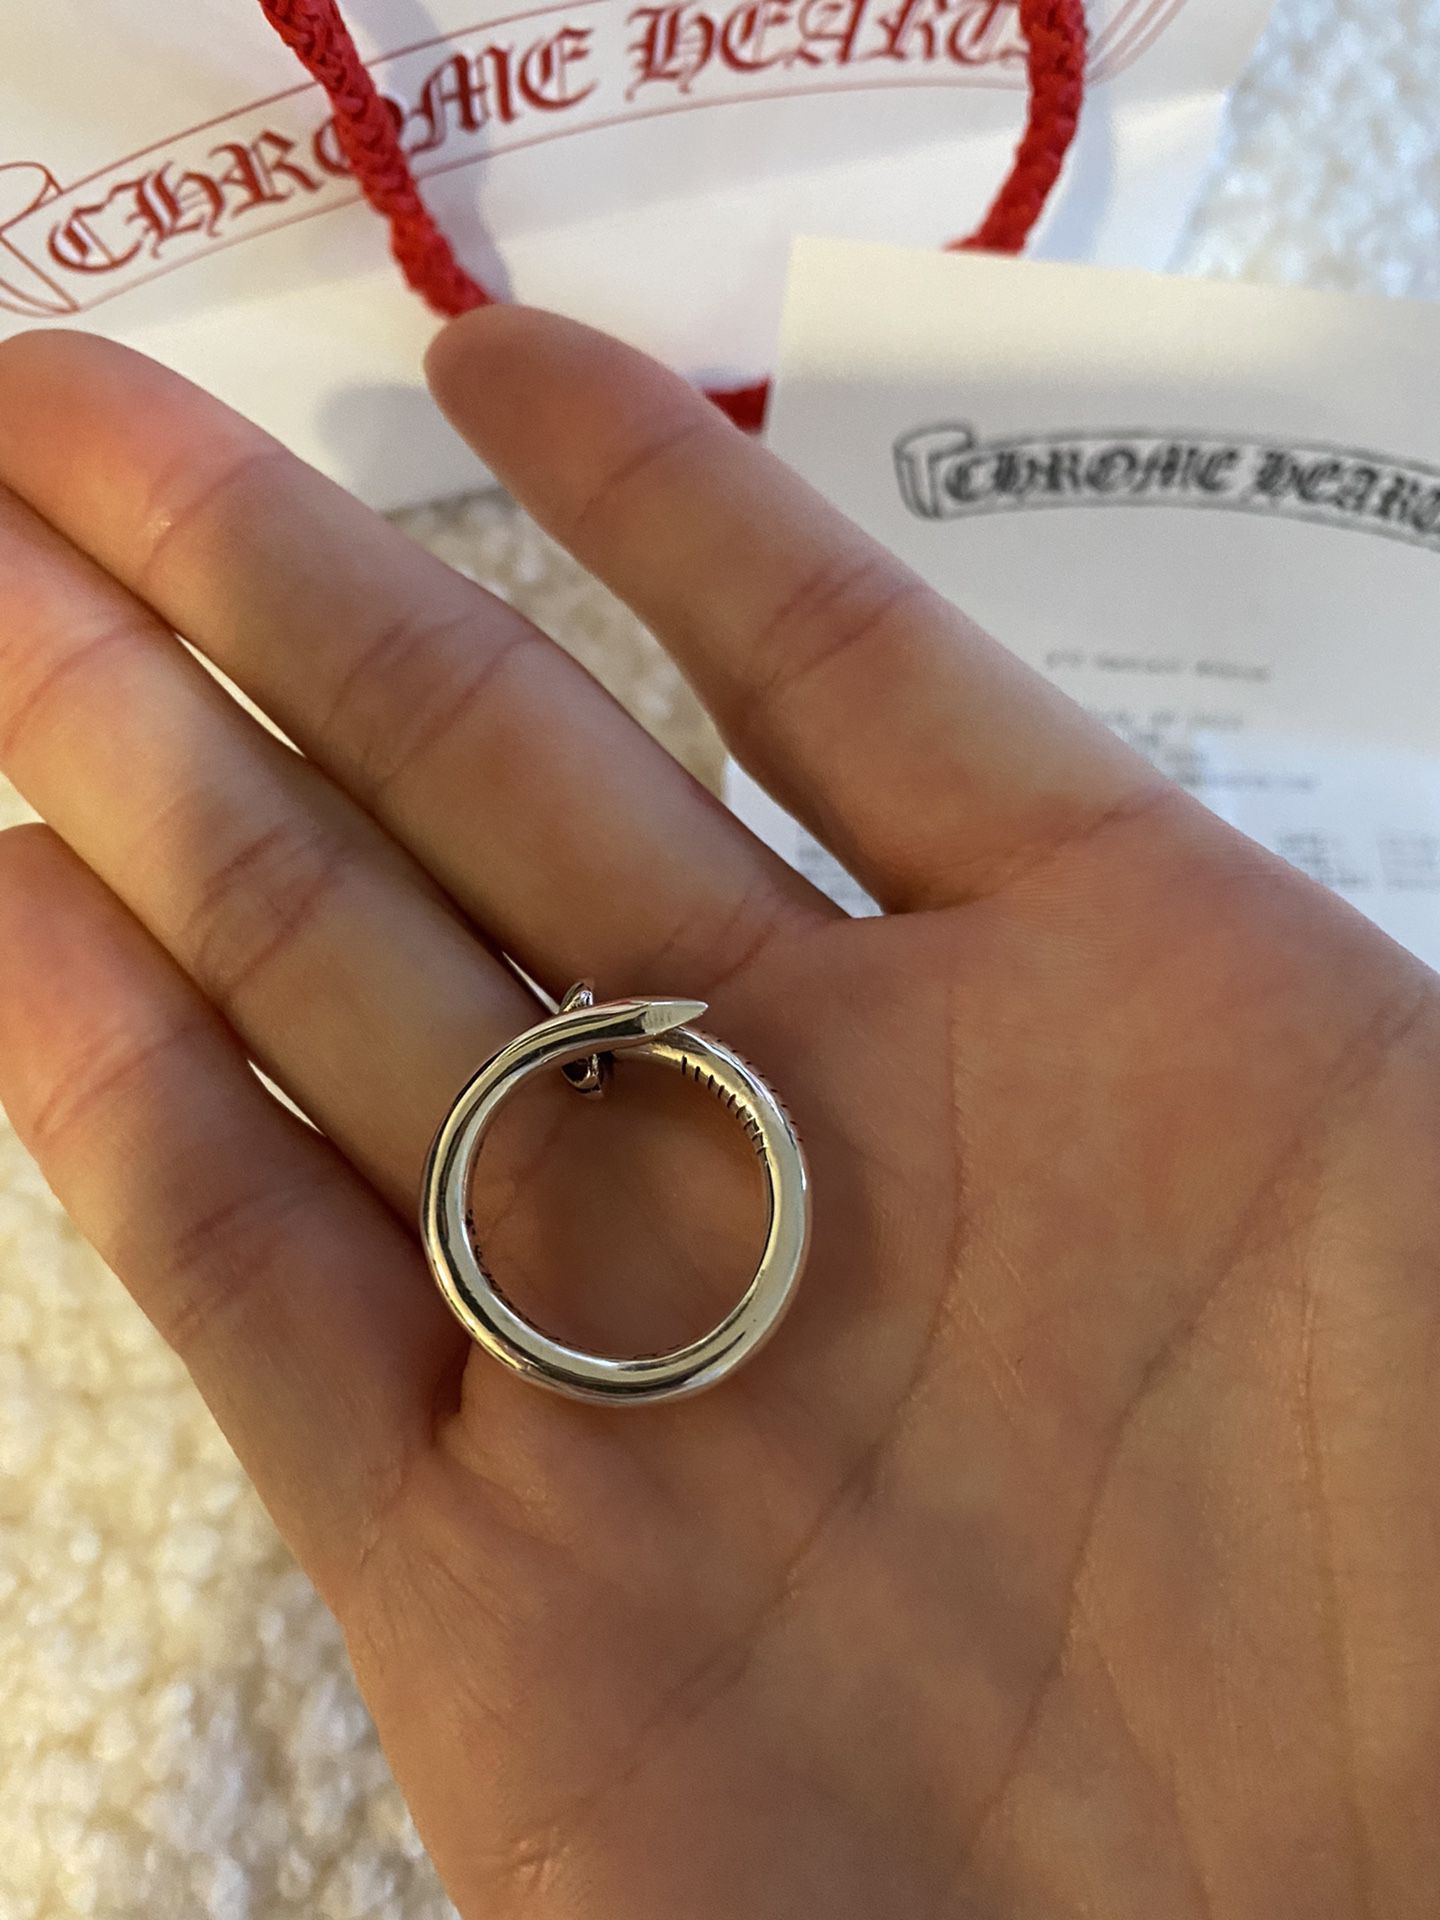 Chrome Hearts Ring for Sale in Gilbert, AZ - OfferUp